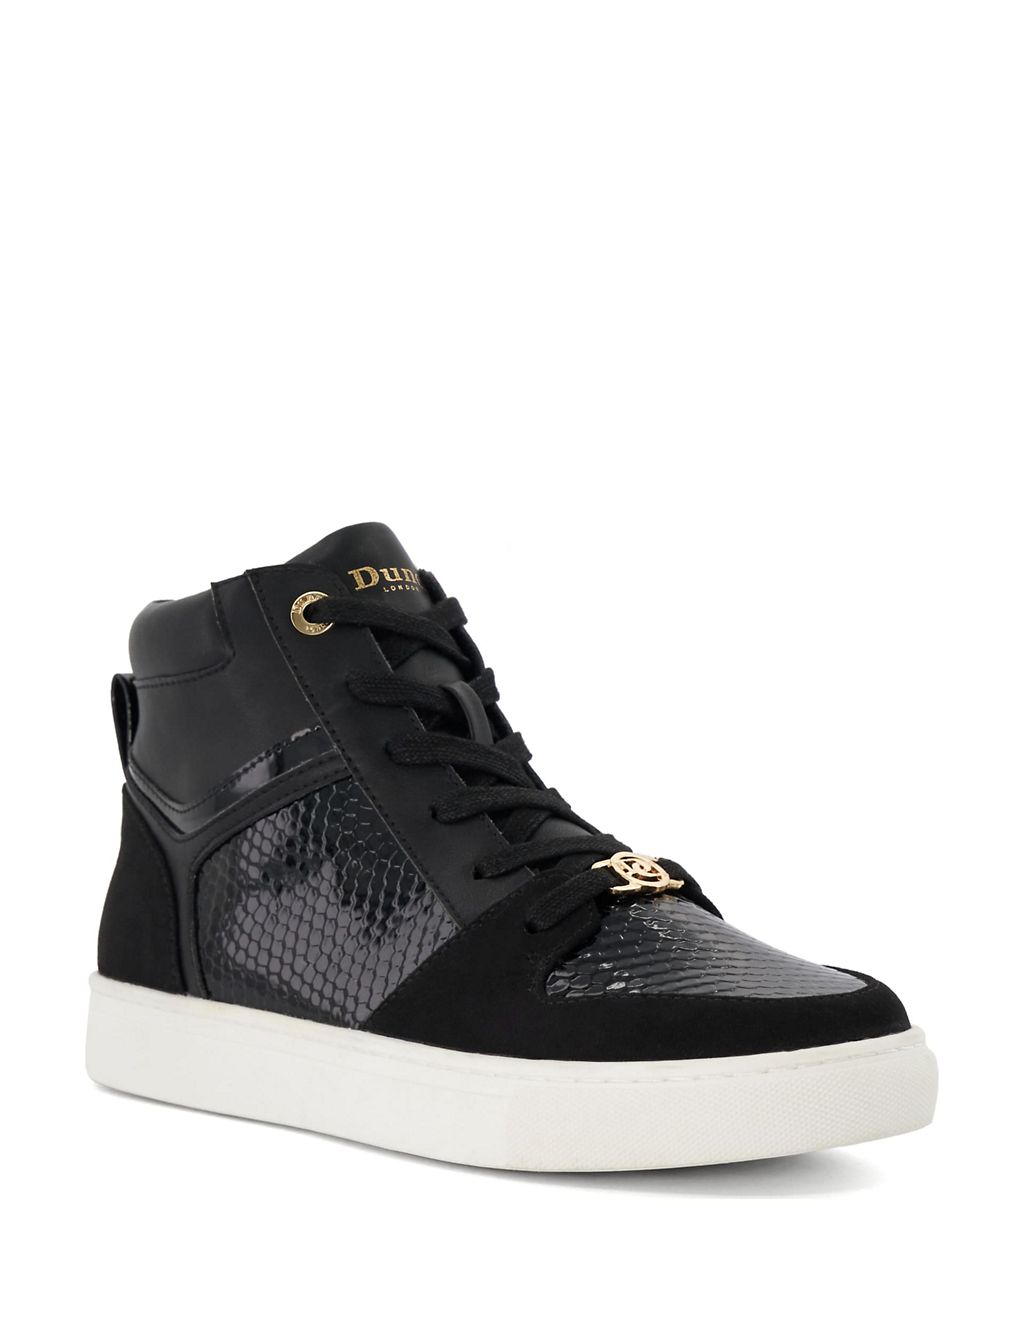 Leather Lace Up High Top Trainers | Dune London | M&S